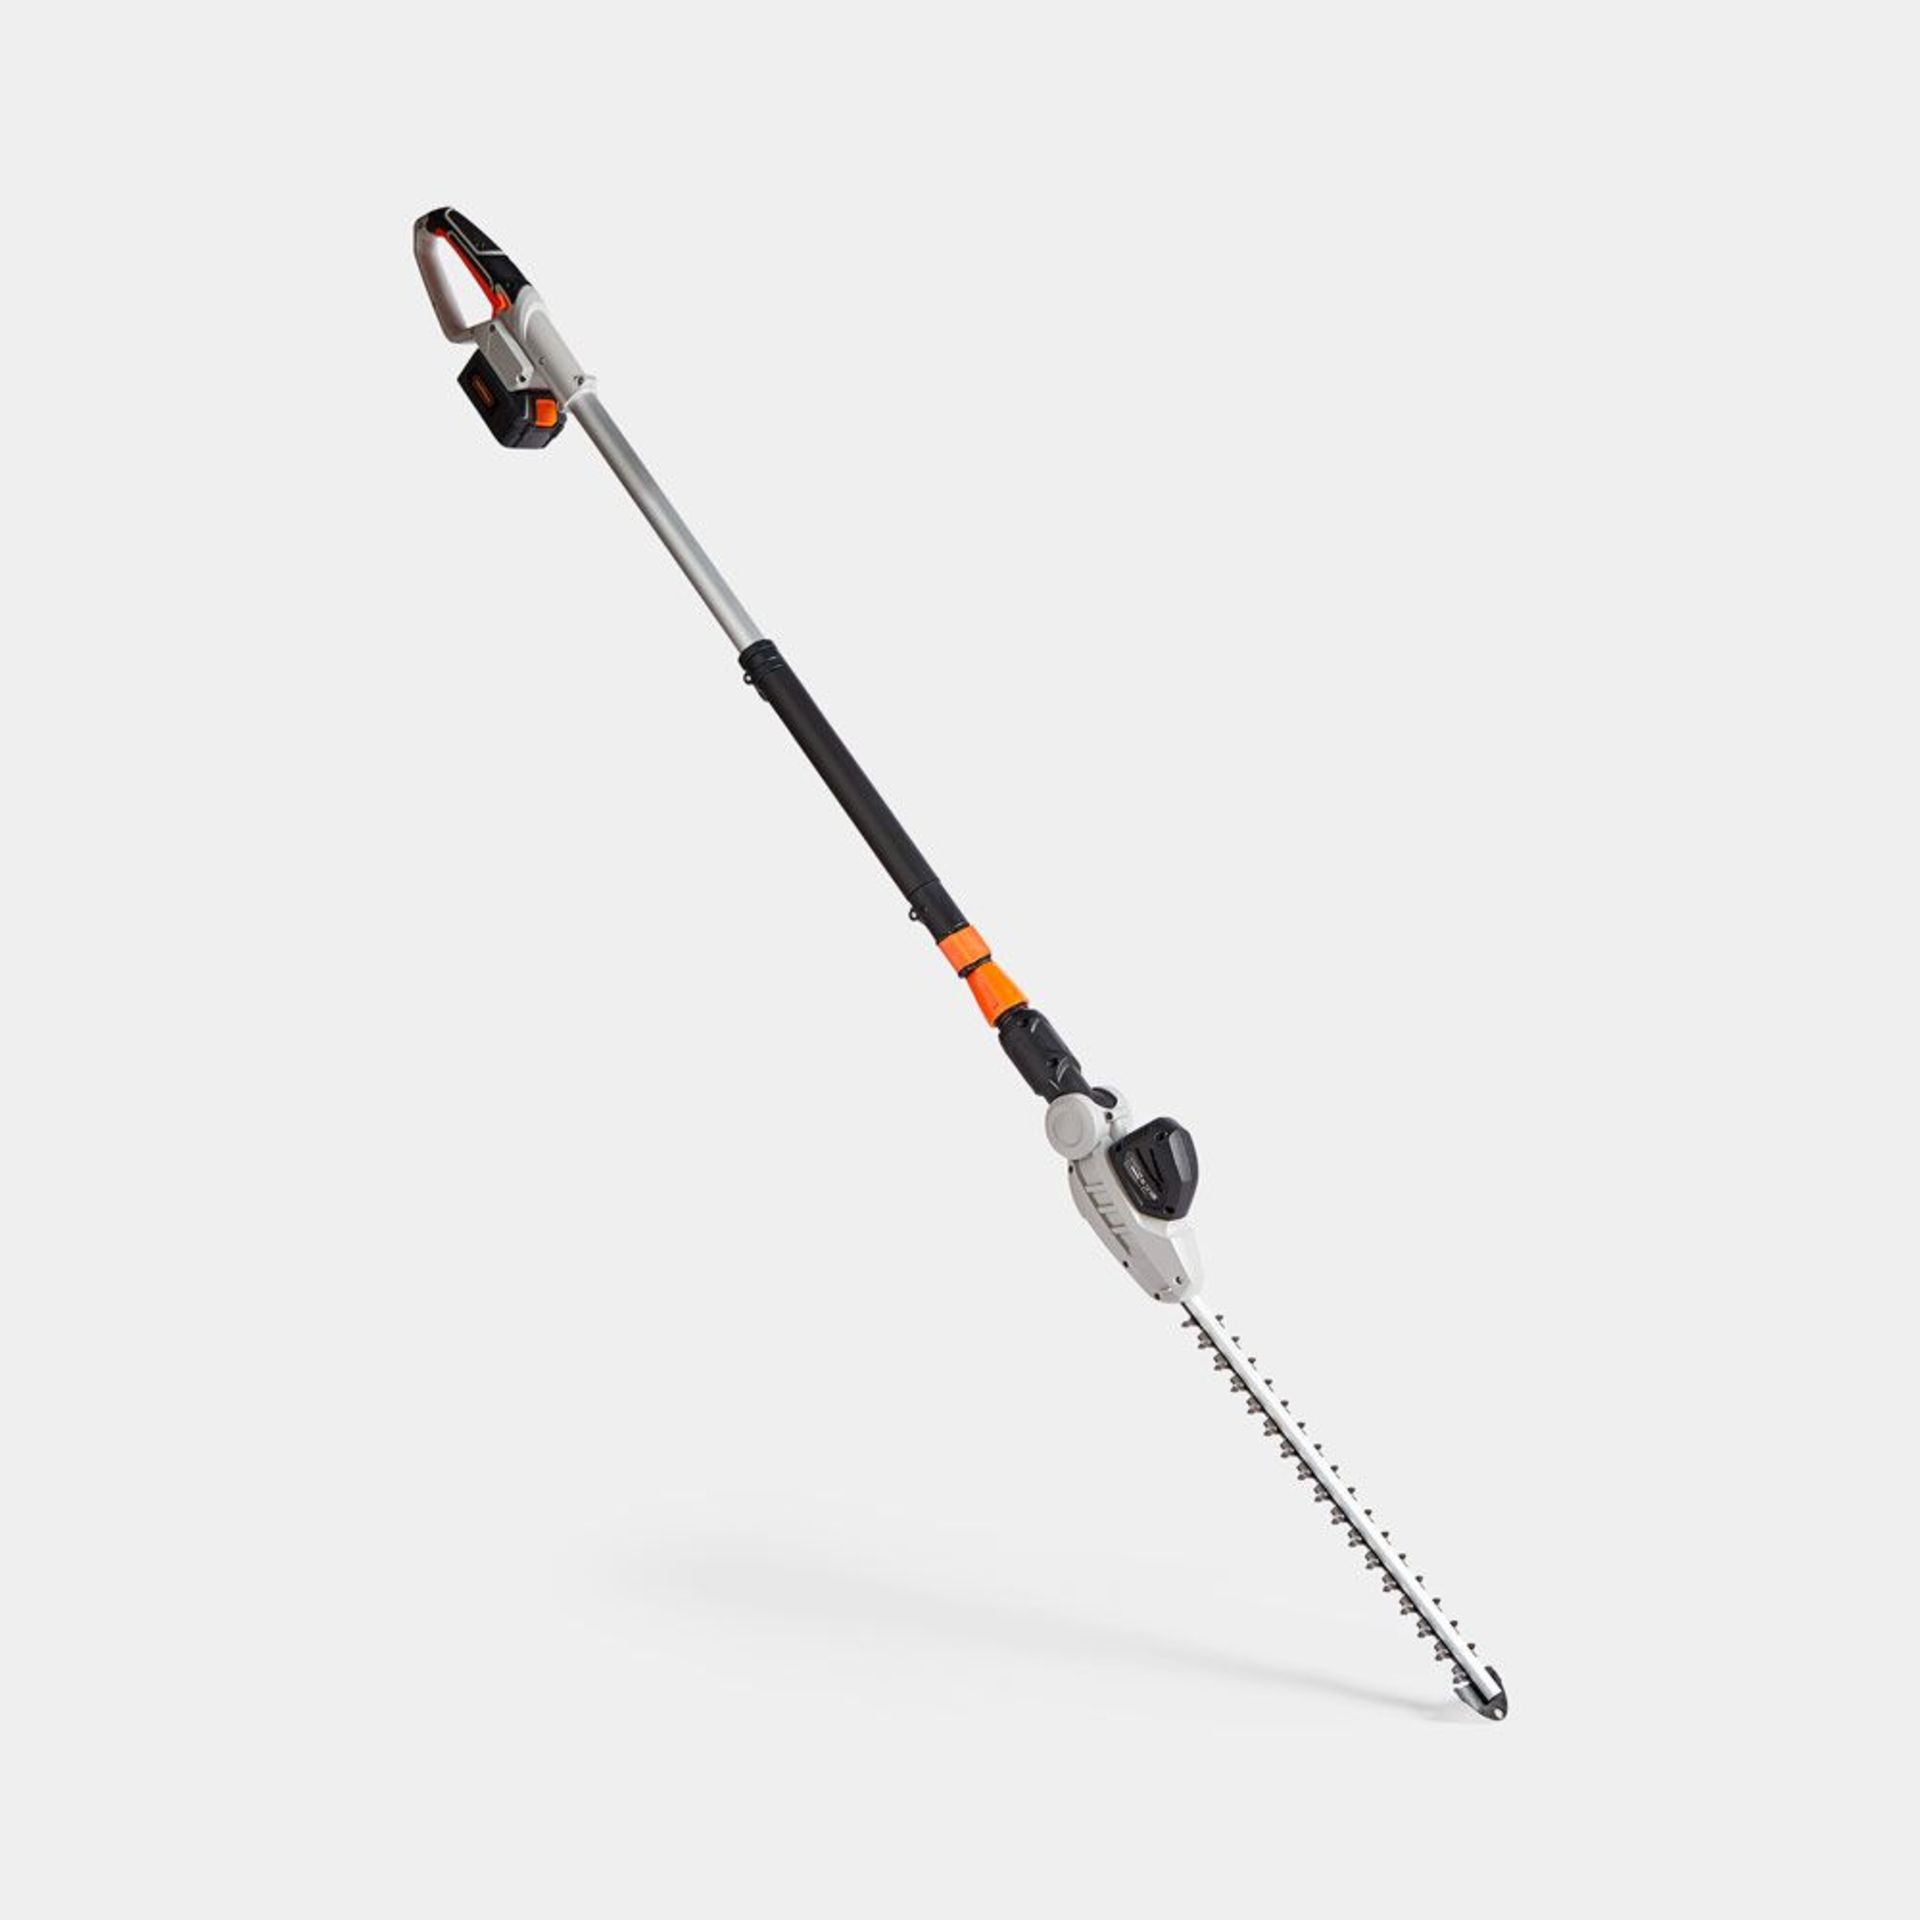 40V Cordless Pole Hedge Trimmer. - BI. trim your garden with efficiency and precision. An 8 Foot